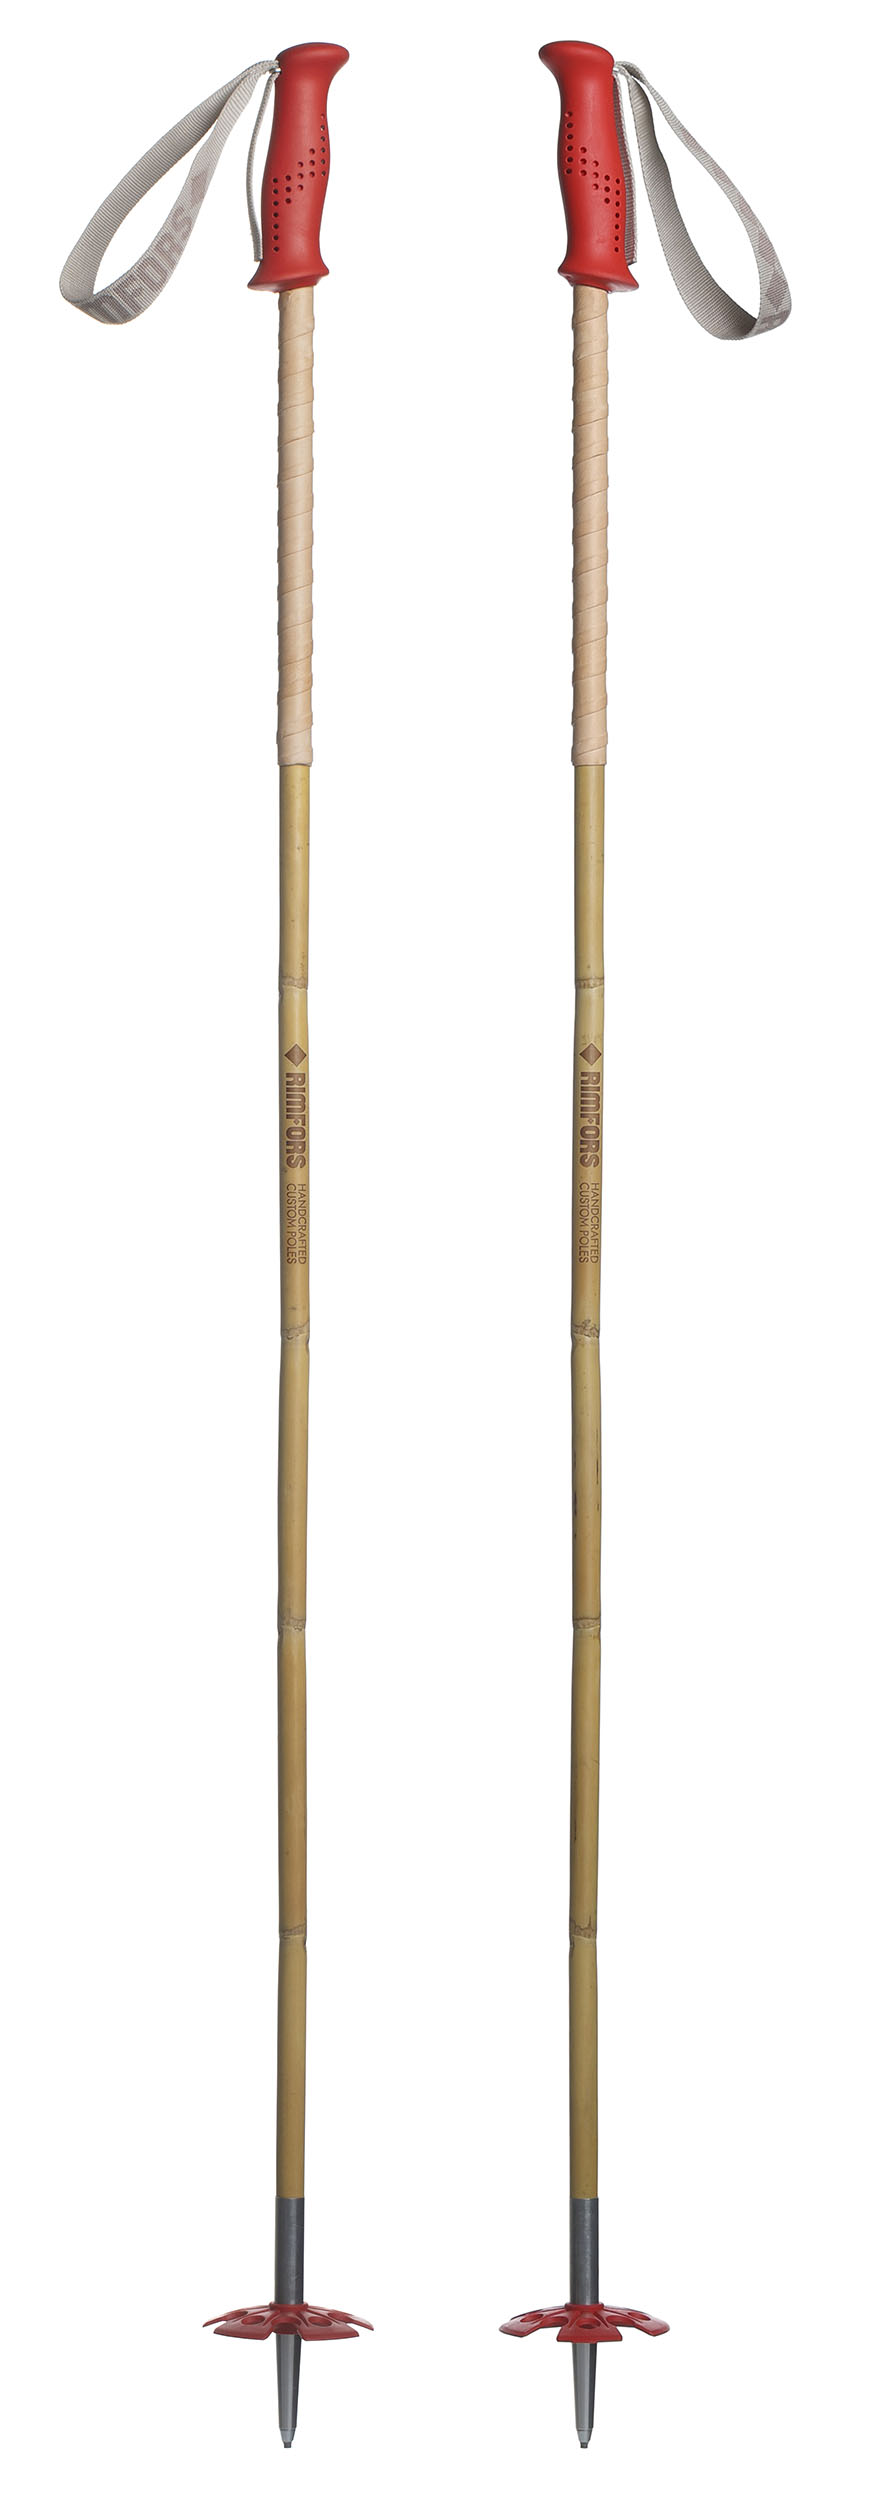 Bamboo ski poles with red grips and 100 mm baskets + extended grip of reindeer leather.